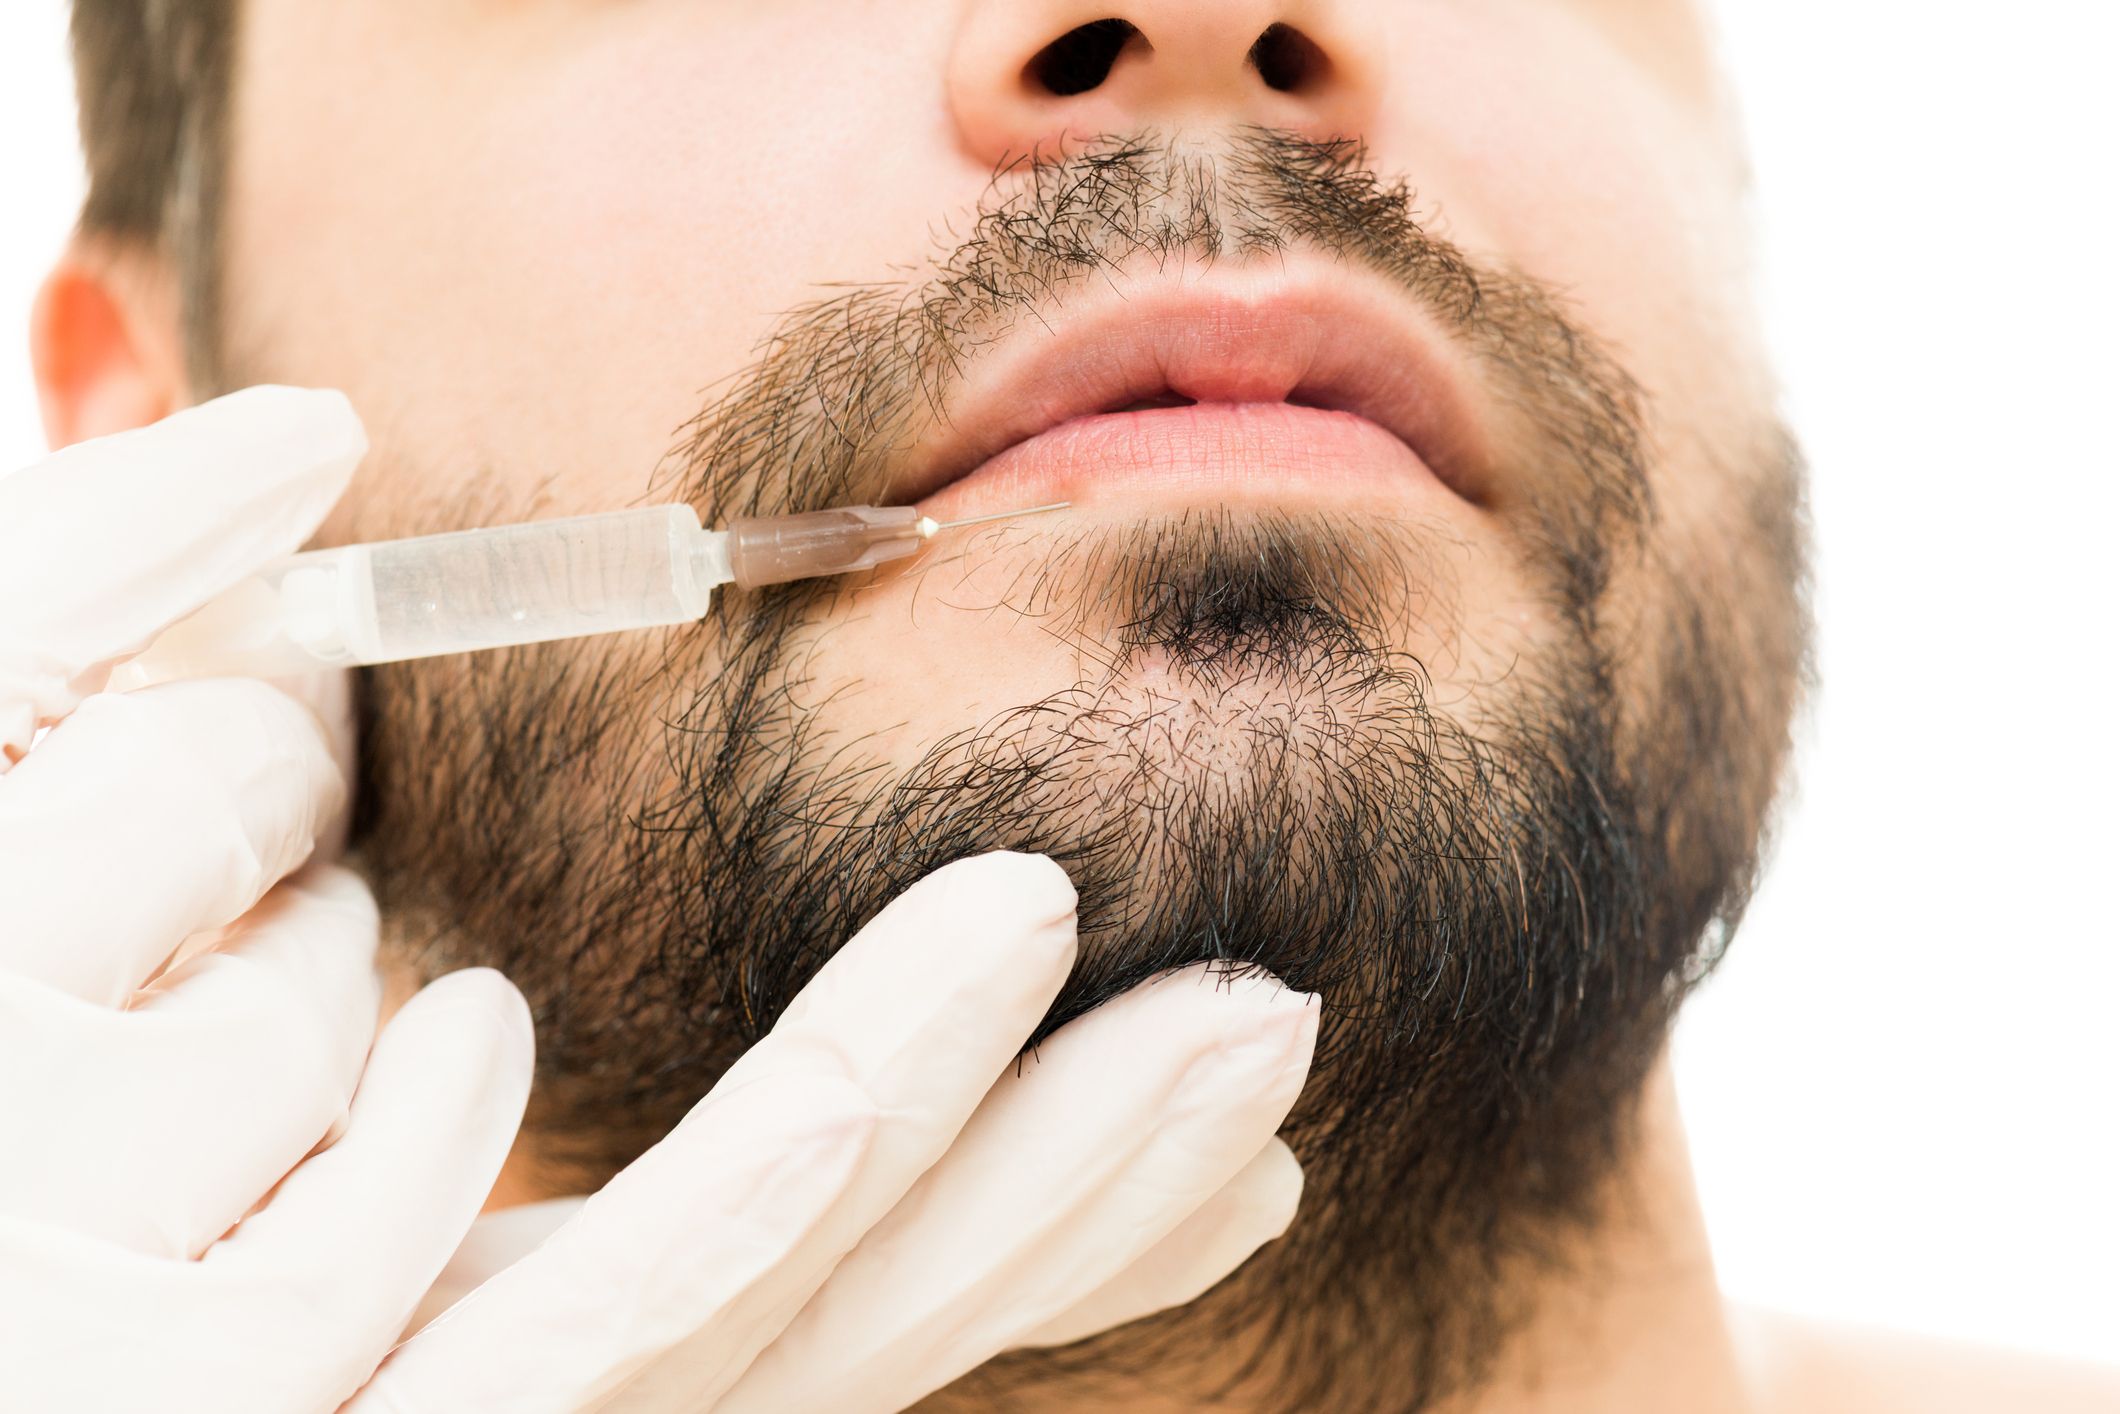 Botox and Dermal Fillers for Men: A Growing Trend